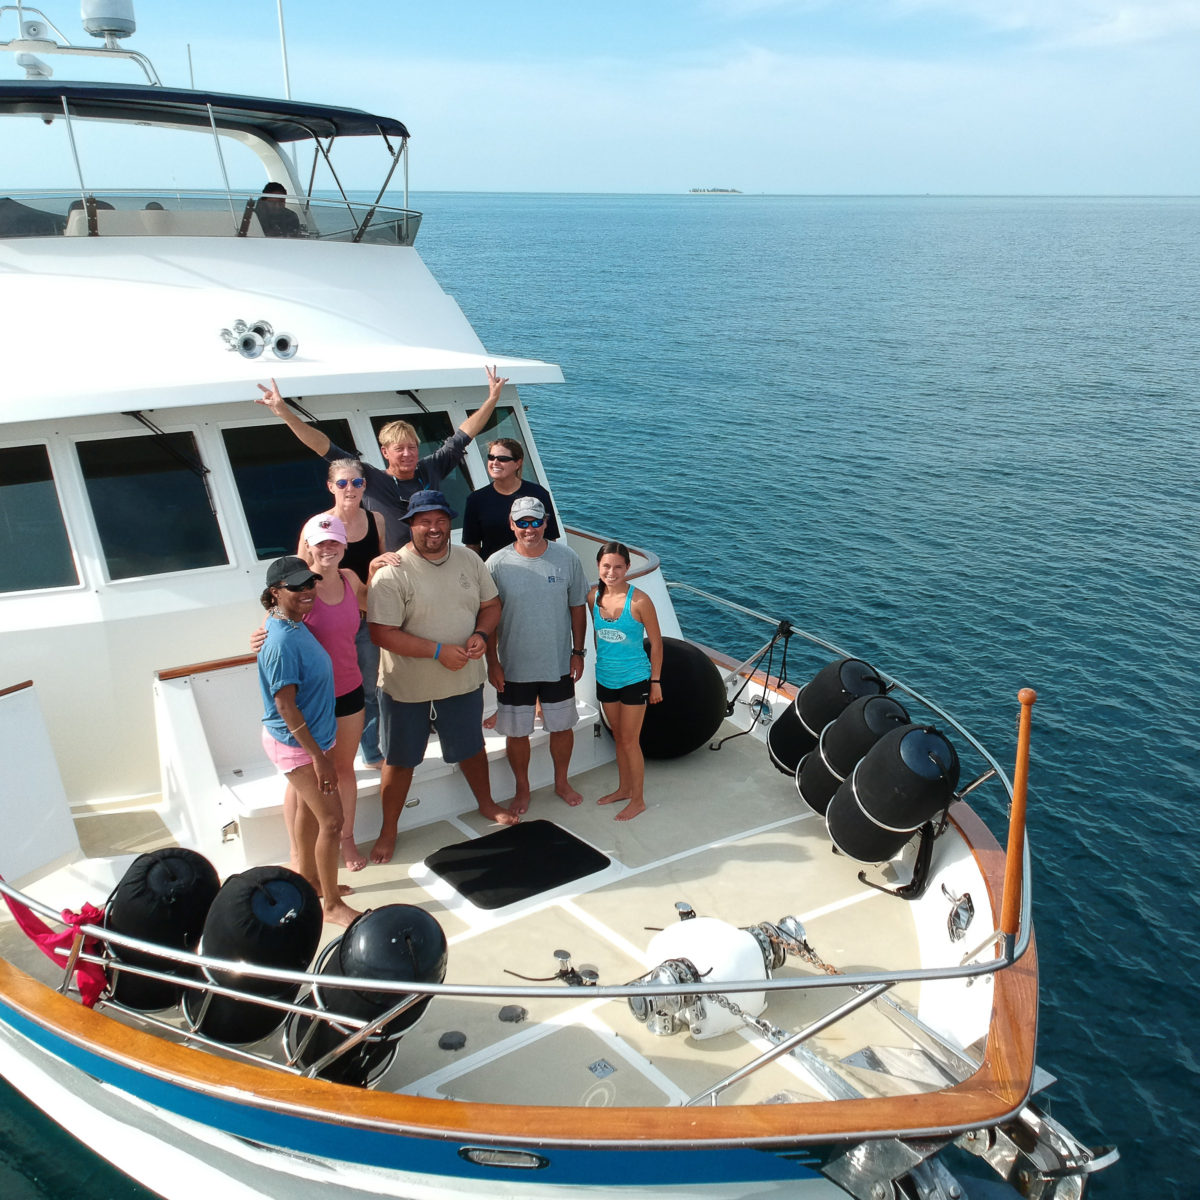 The team from Expedition 30 on the bow of R/V ANGARI. PC: Katie Storr